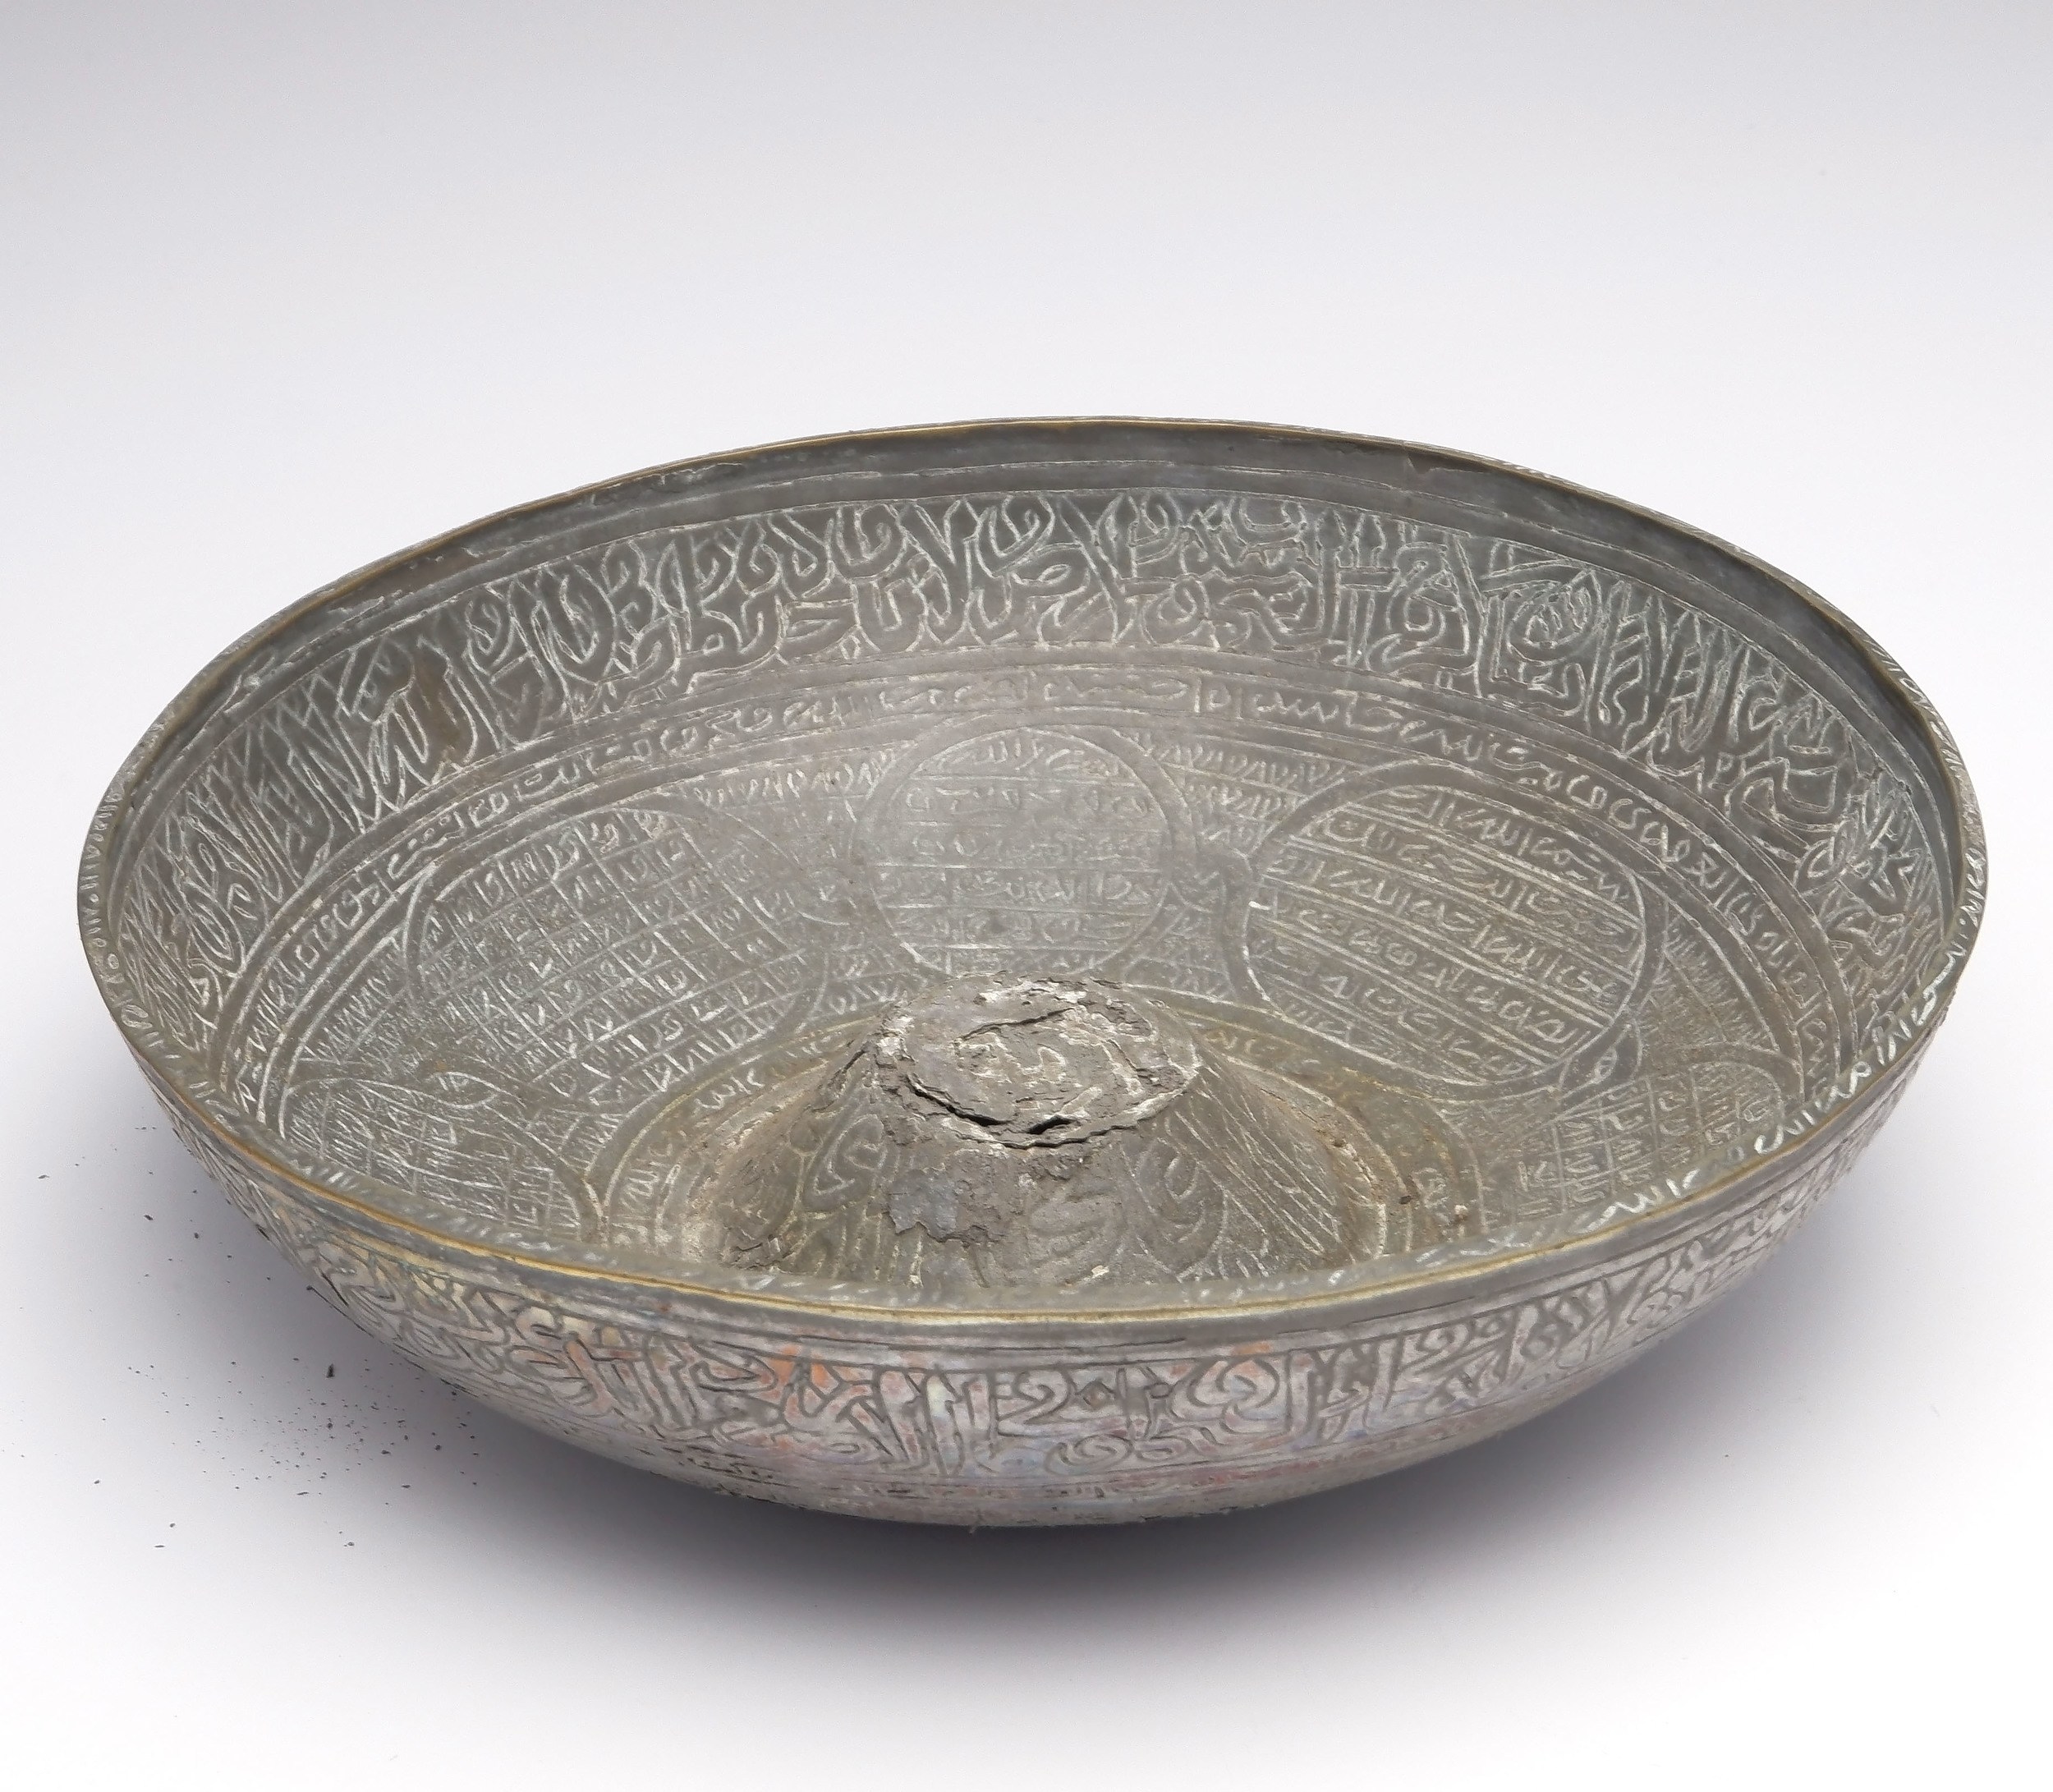 'Islamic Indo-Persian Tinned Brass Divination or Magic Bowl, 18th/19th Century'